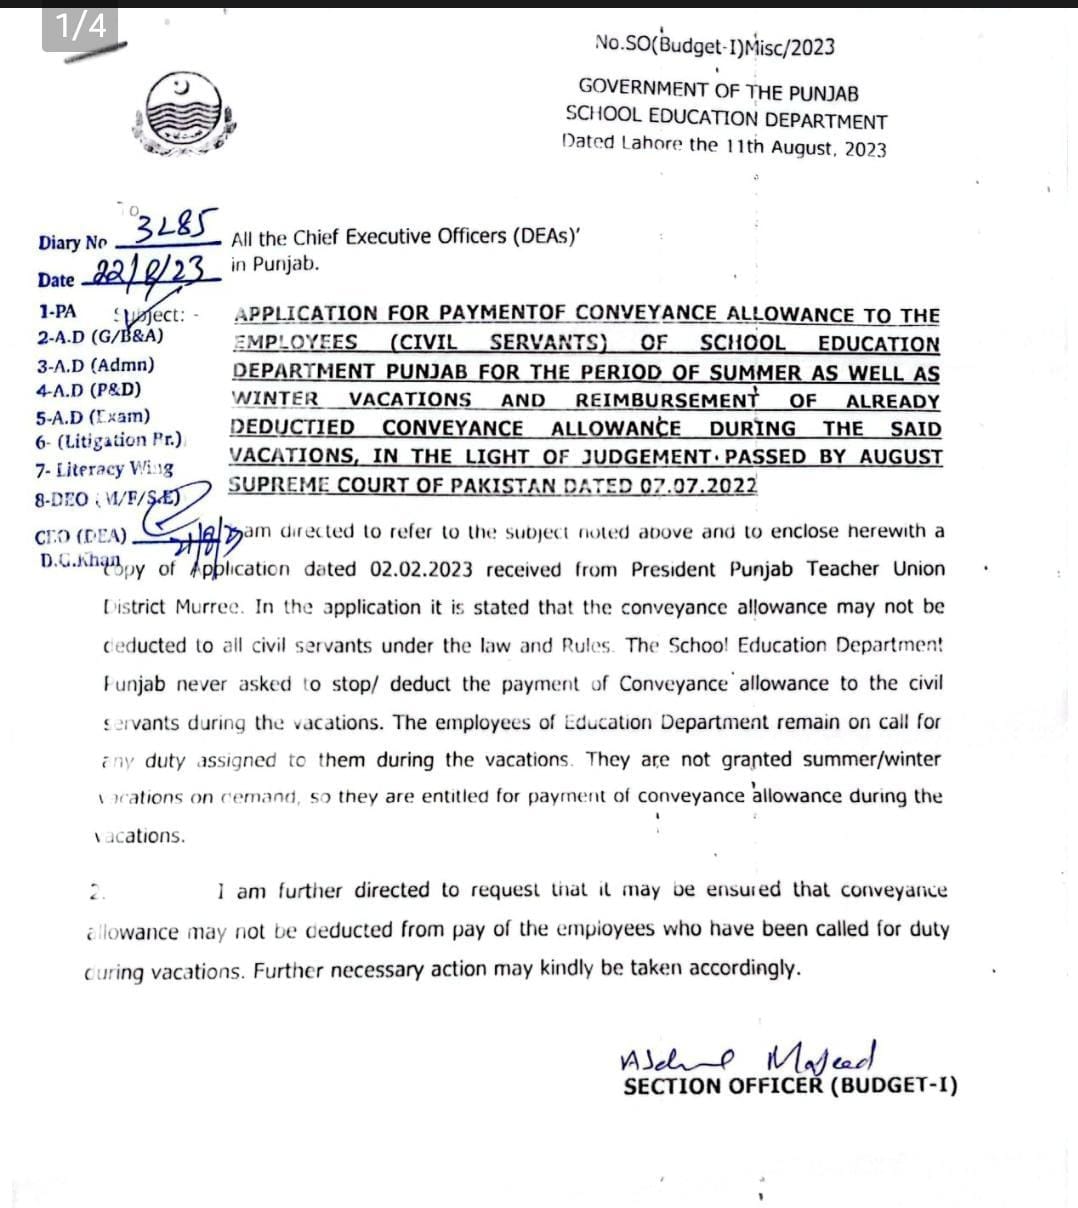 Conveyance Allowance for Teachers during Vacation SED Punjab